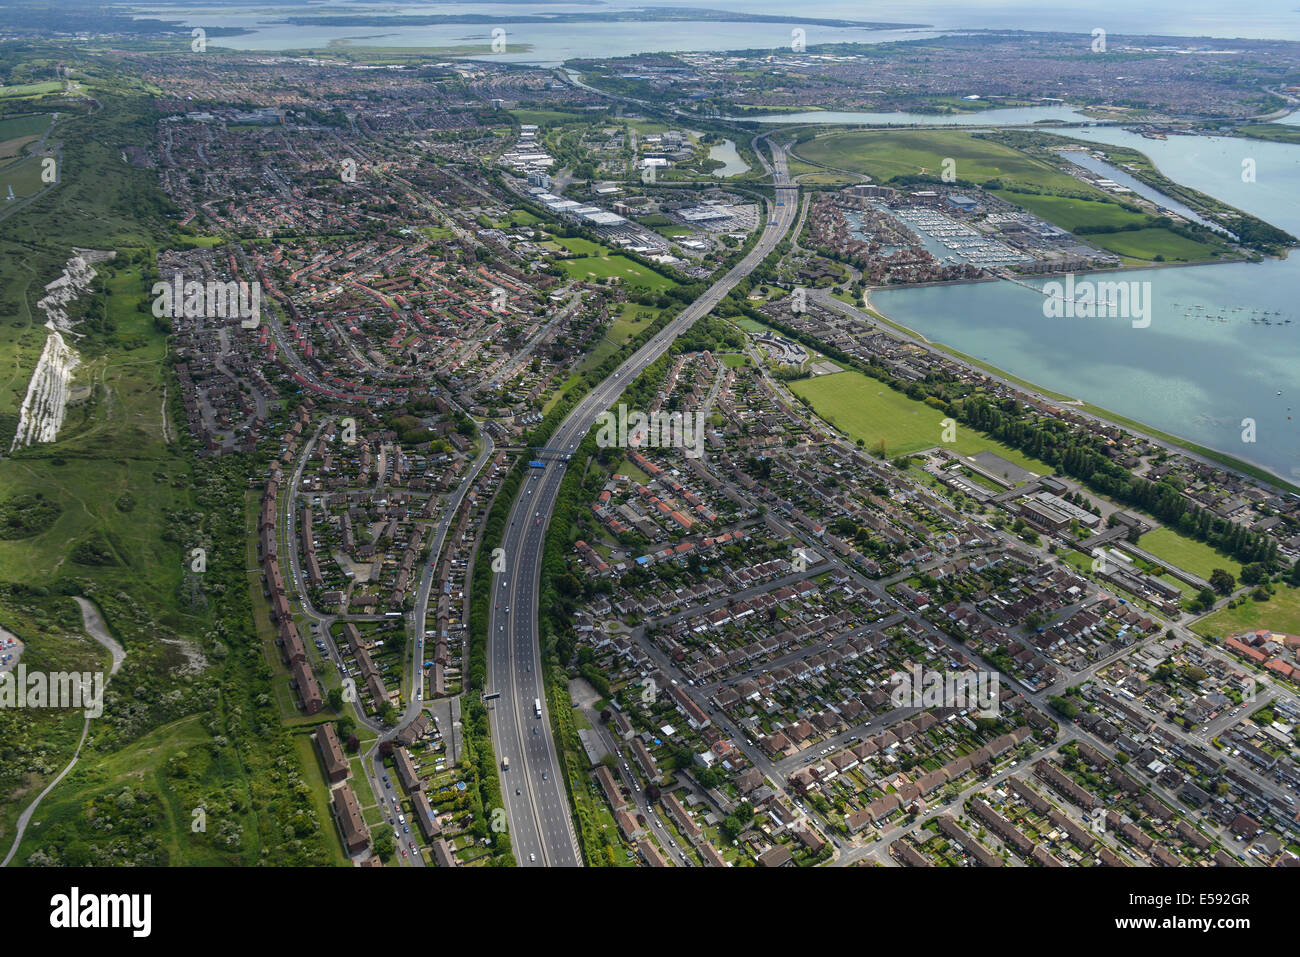 An aerial view looking down the M27 with Paulsgrove and Portchester in the foreground and Portsmouth in the distance. Stock Photo